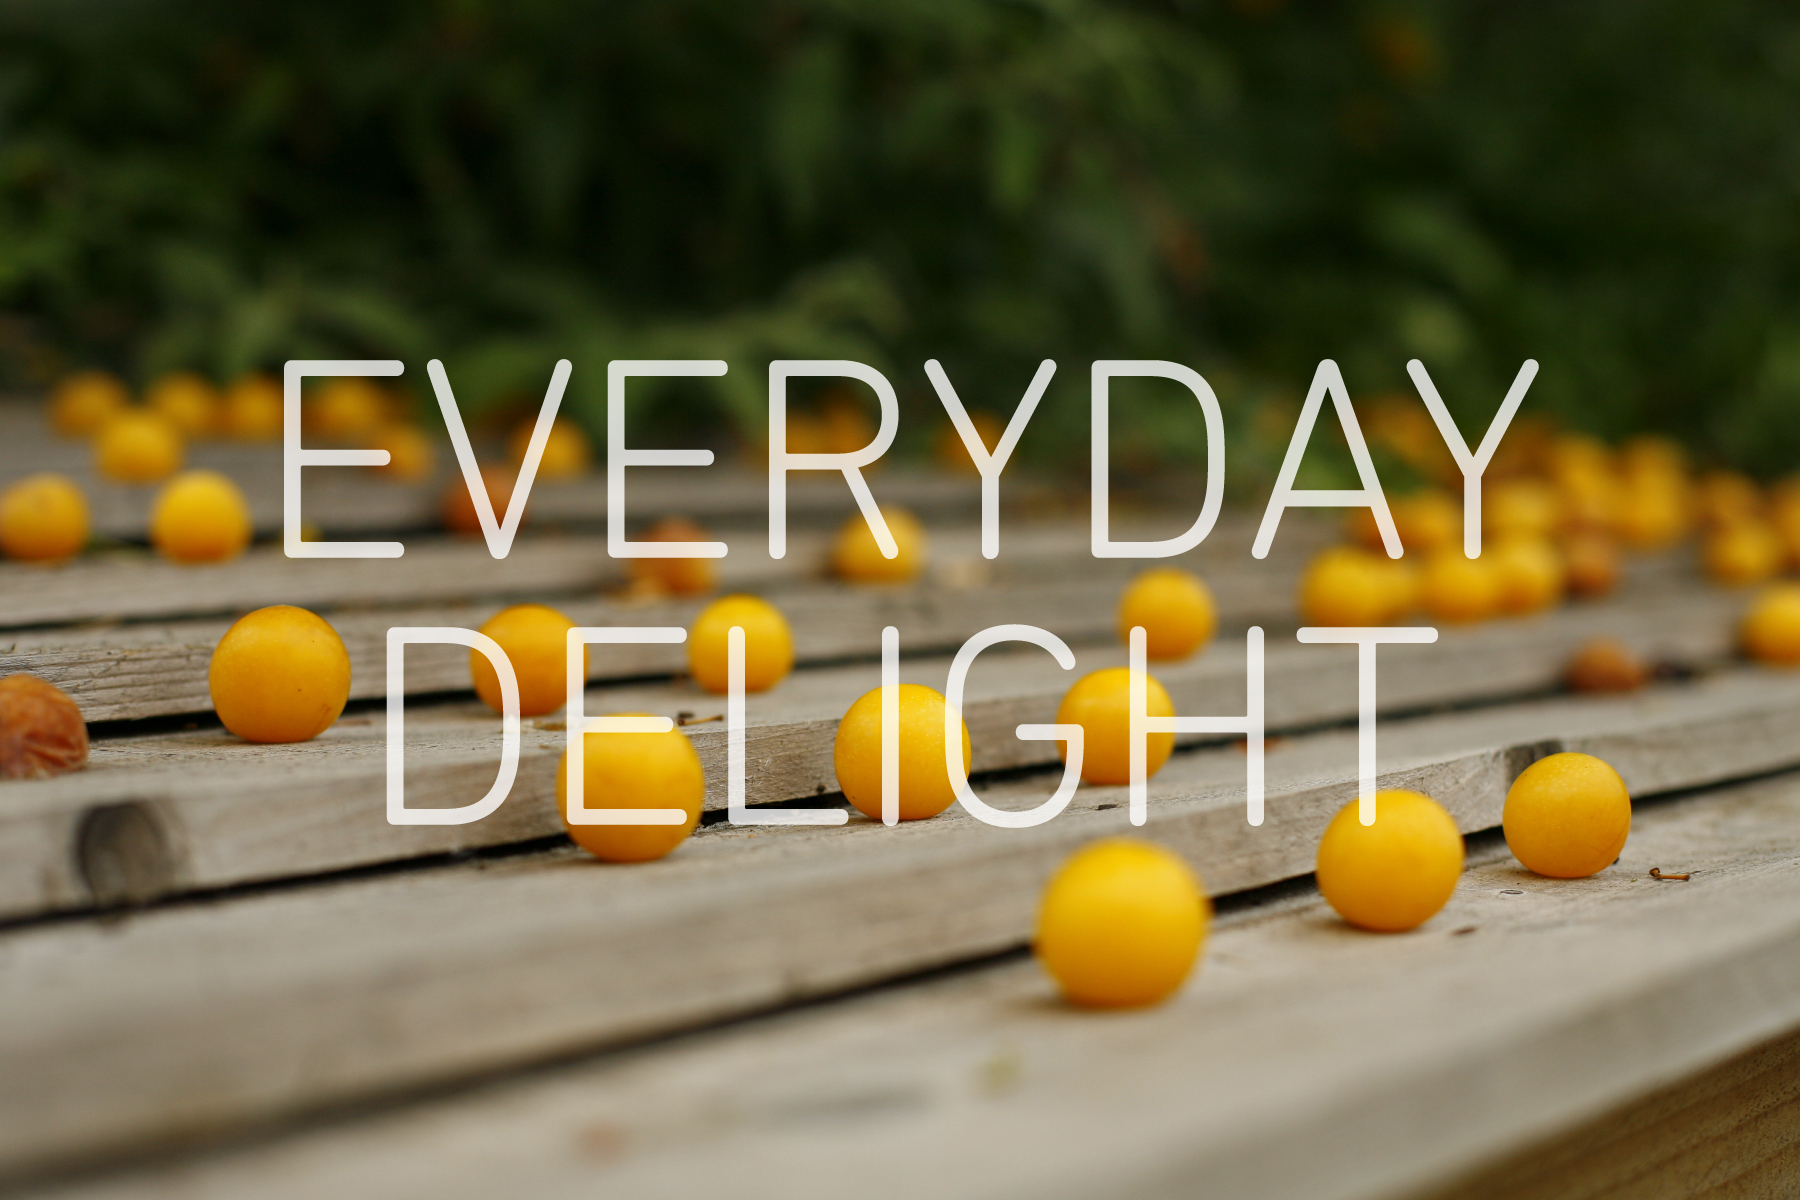 Graphic with 'EVERYDAY DELIGHT' in white text in the centre, with a photograph in the background of yellow fruit across a wooden surface, and foliage in the background.